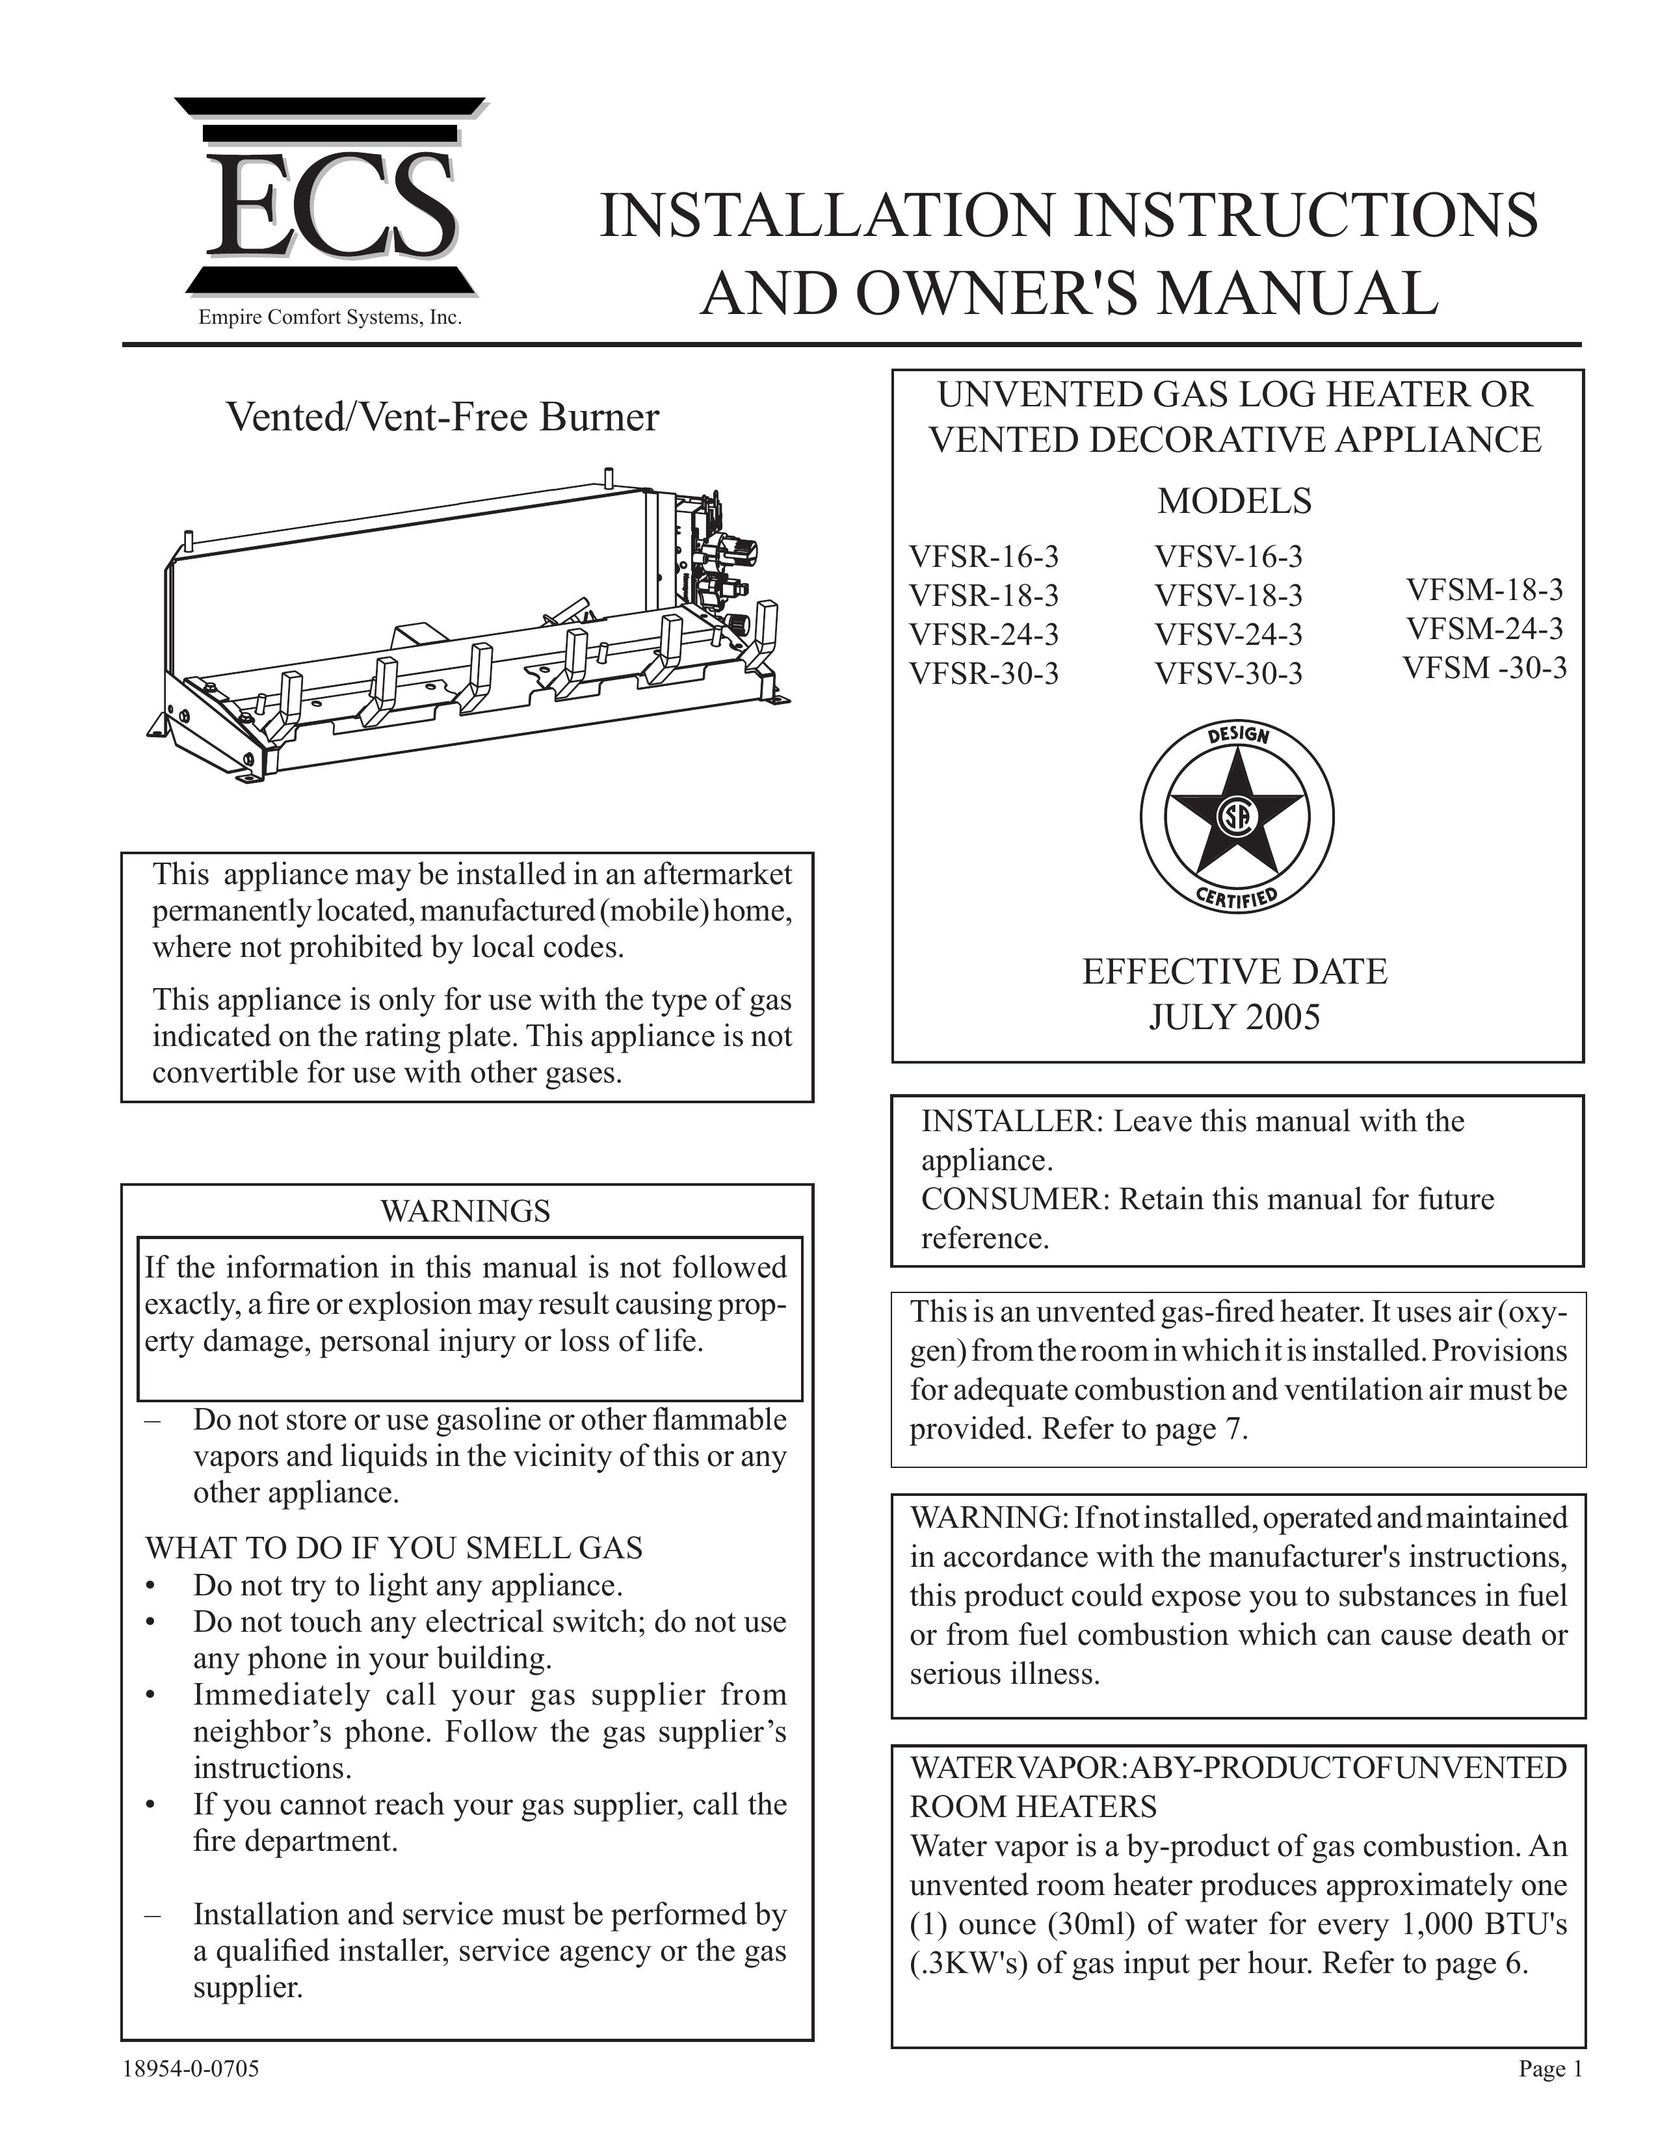 Empire Comfort Systems VFSM-18-3 Electric Heater User Manual